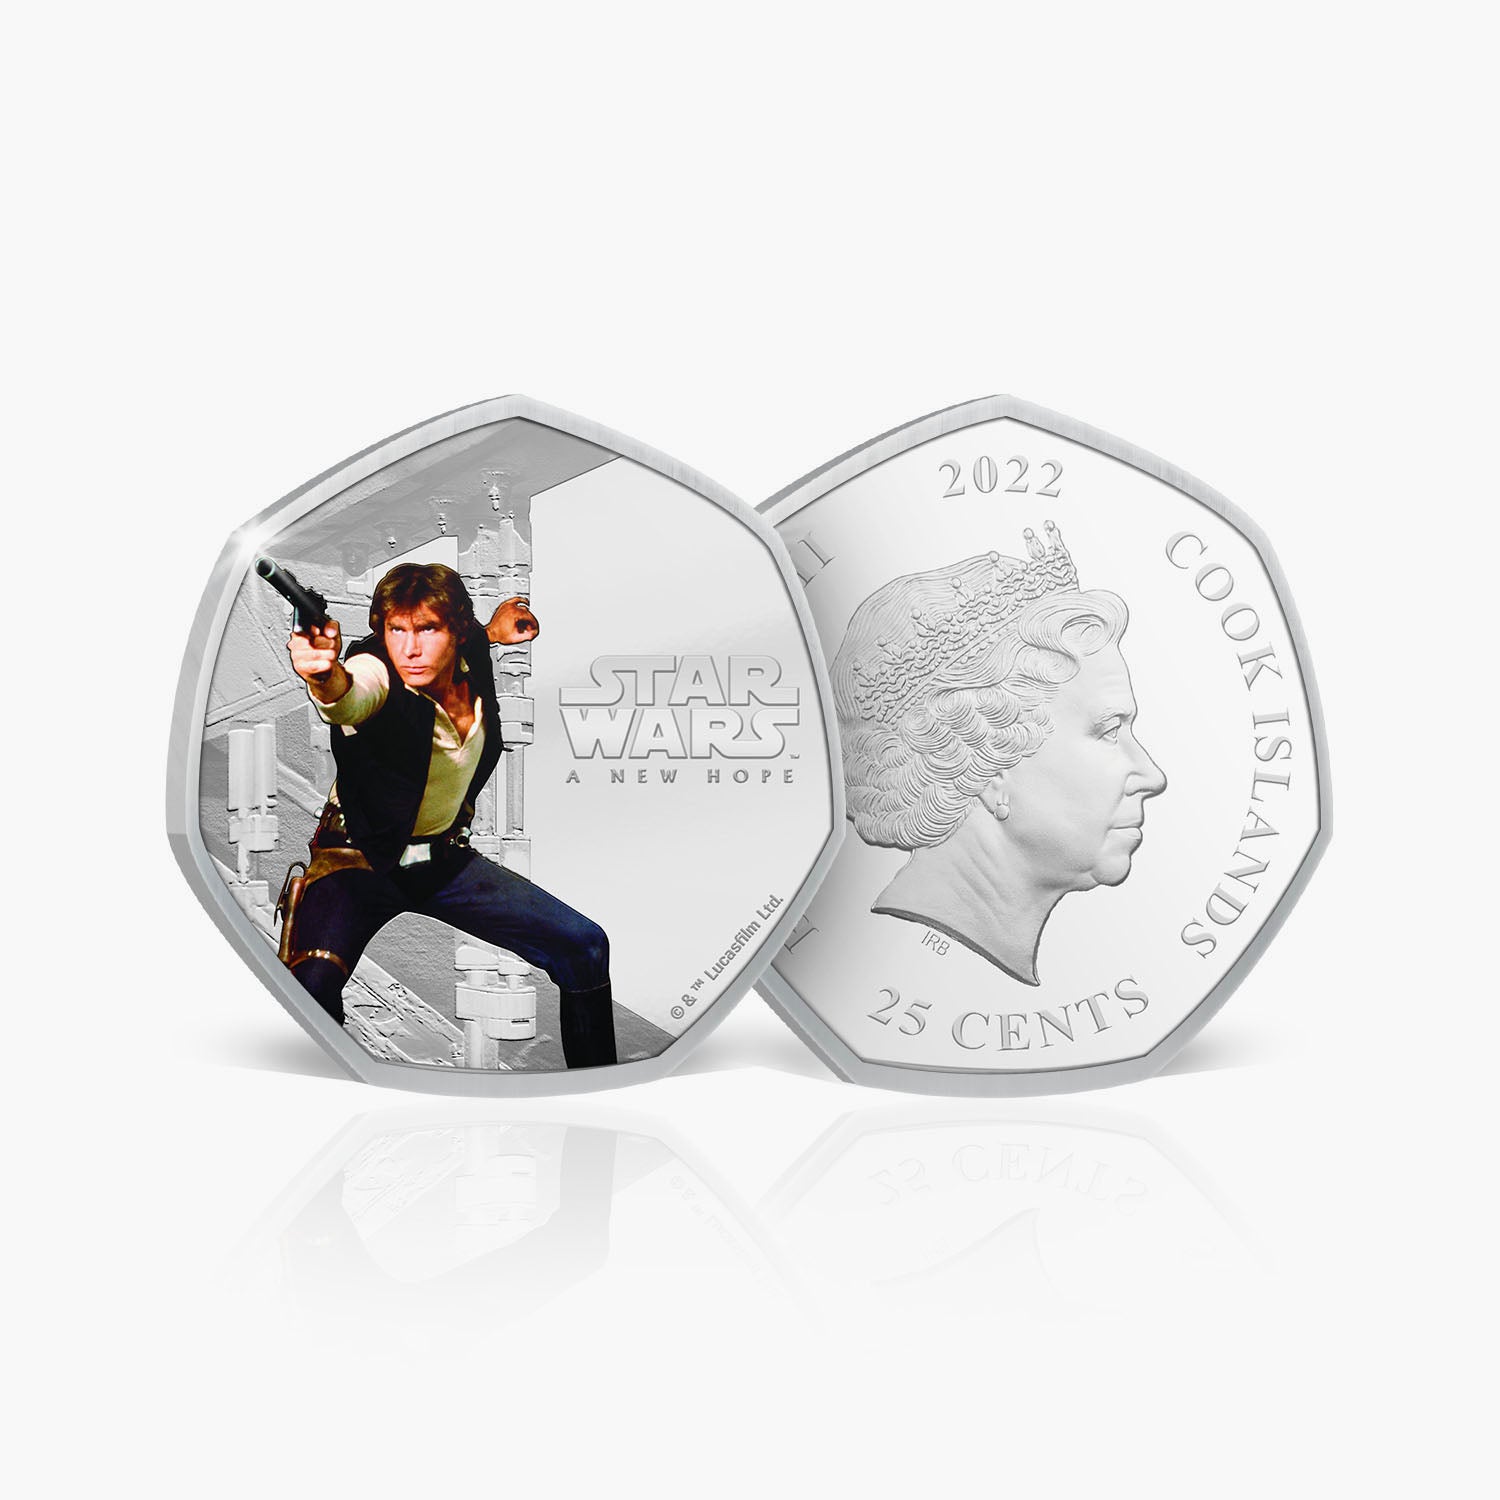 A New Hope - Han Solo Silver Plated Coin